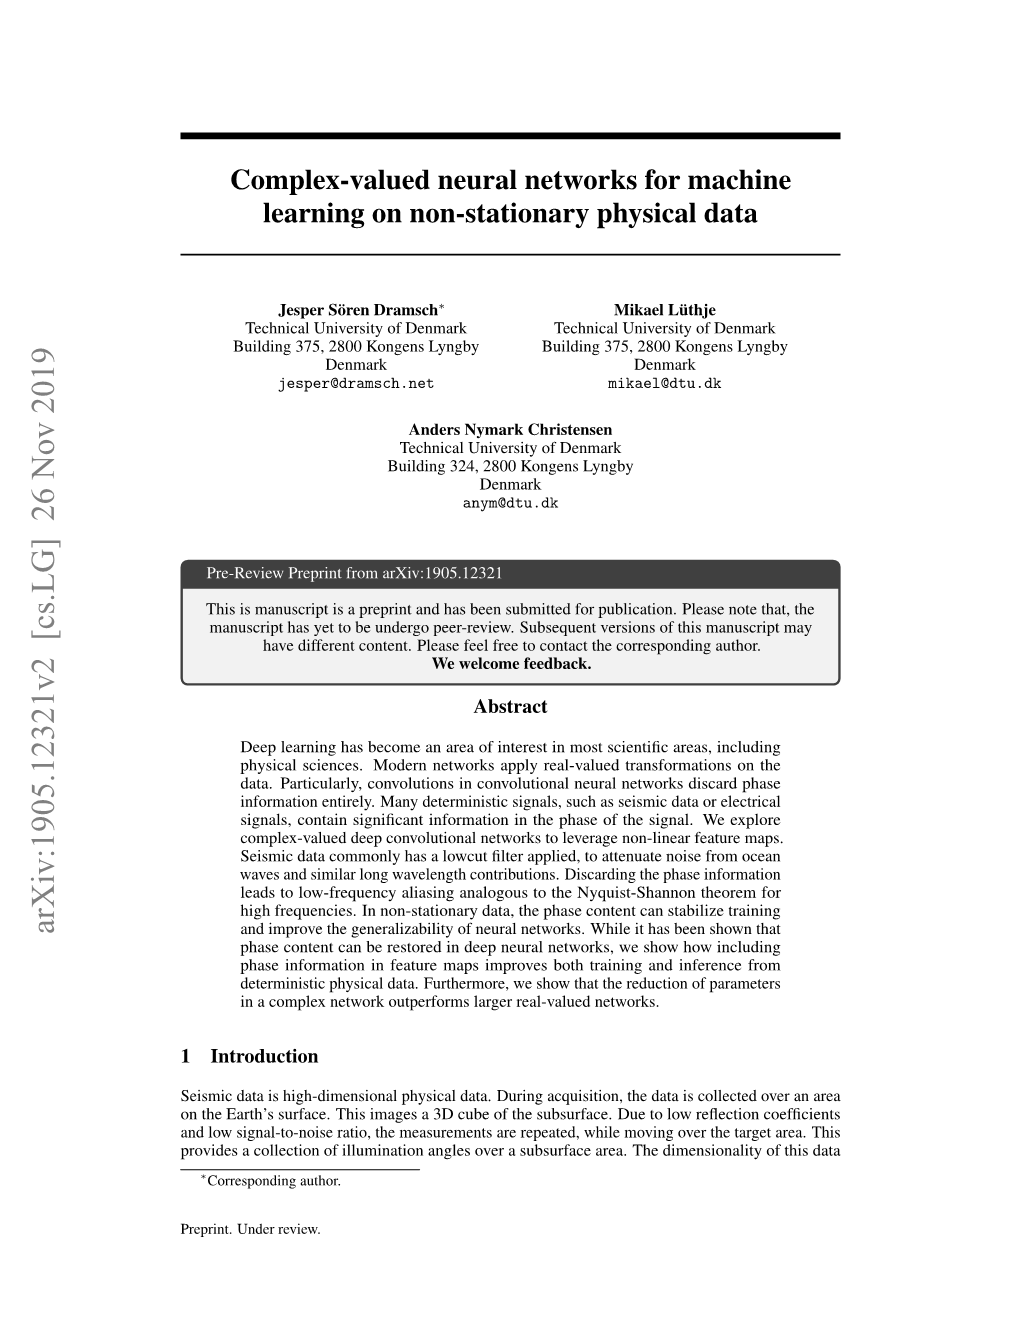 Complex-Valued Neural Networks for Machine Learning on Non-Stationary Physical Data